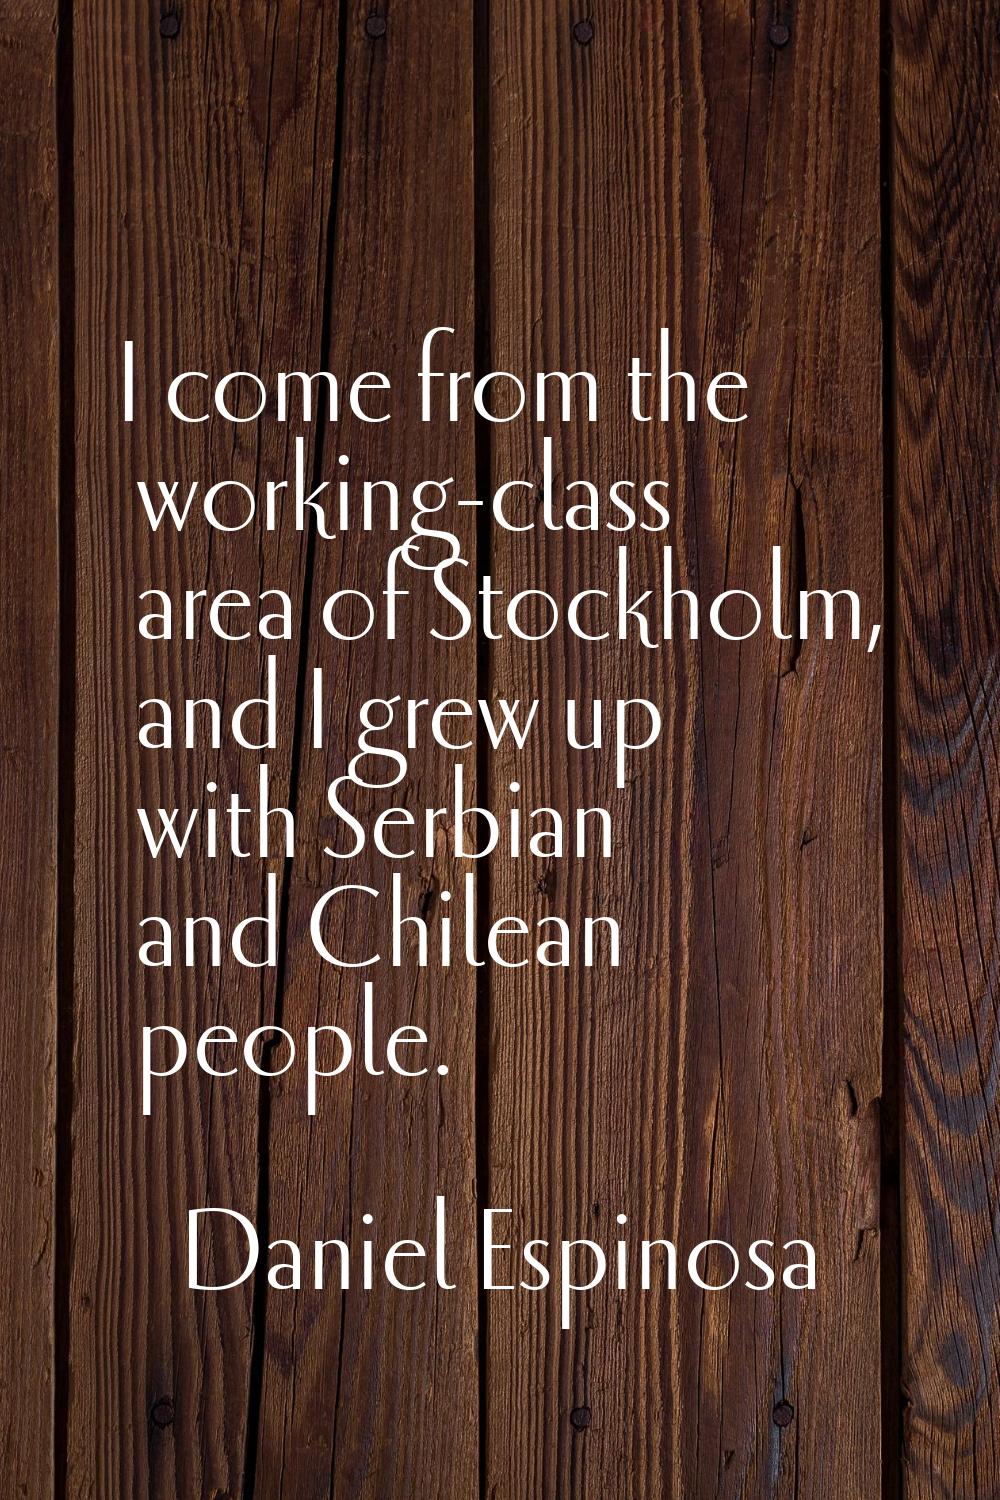 I come from the working-class area of Stockholm, and I grew up with Serbian and Chilean people.